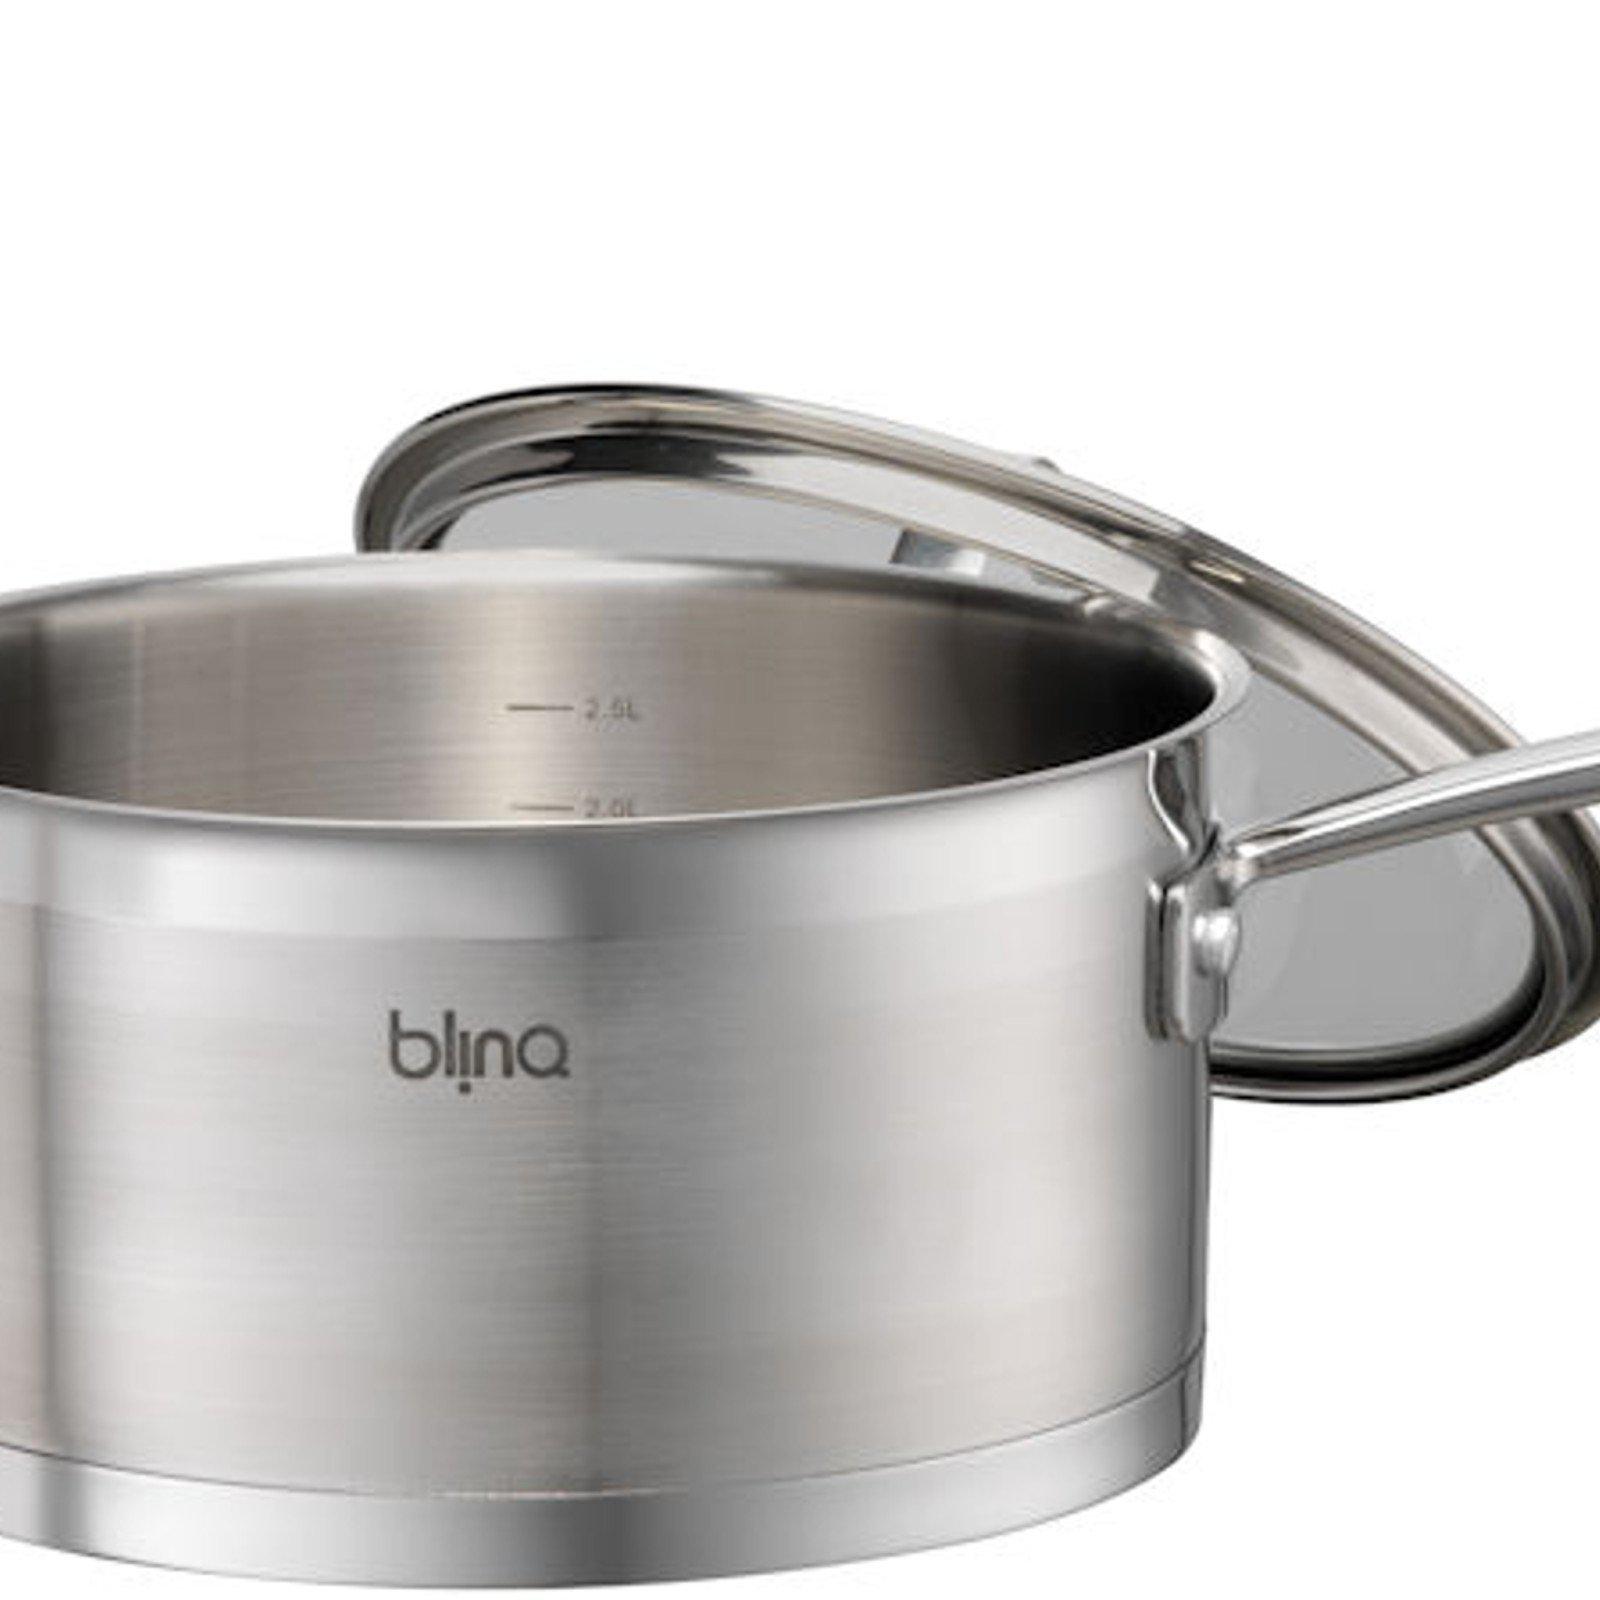 Blinq Gourmet Saucepan - 20 cm / 3.2 Litre Saucepan with Lid - Induction Compatible-Stainless Steel Cookware-Chef's Quality Cookware